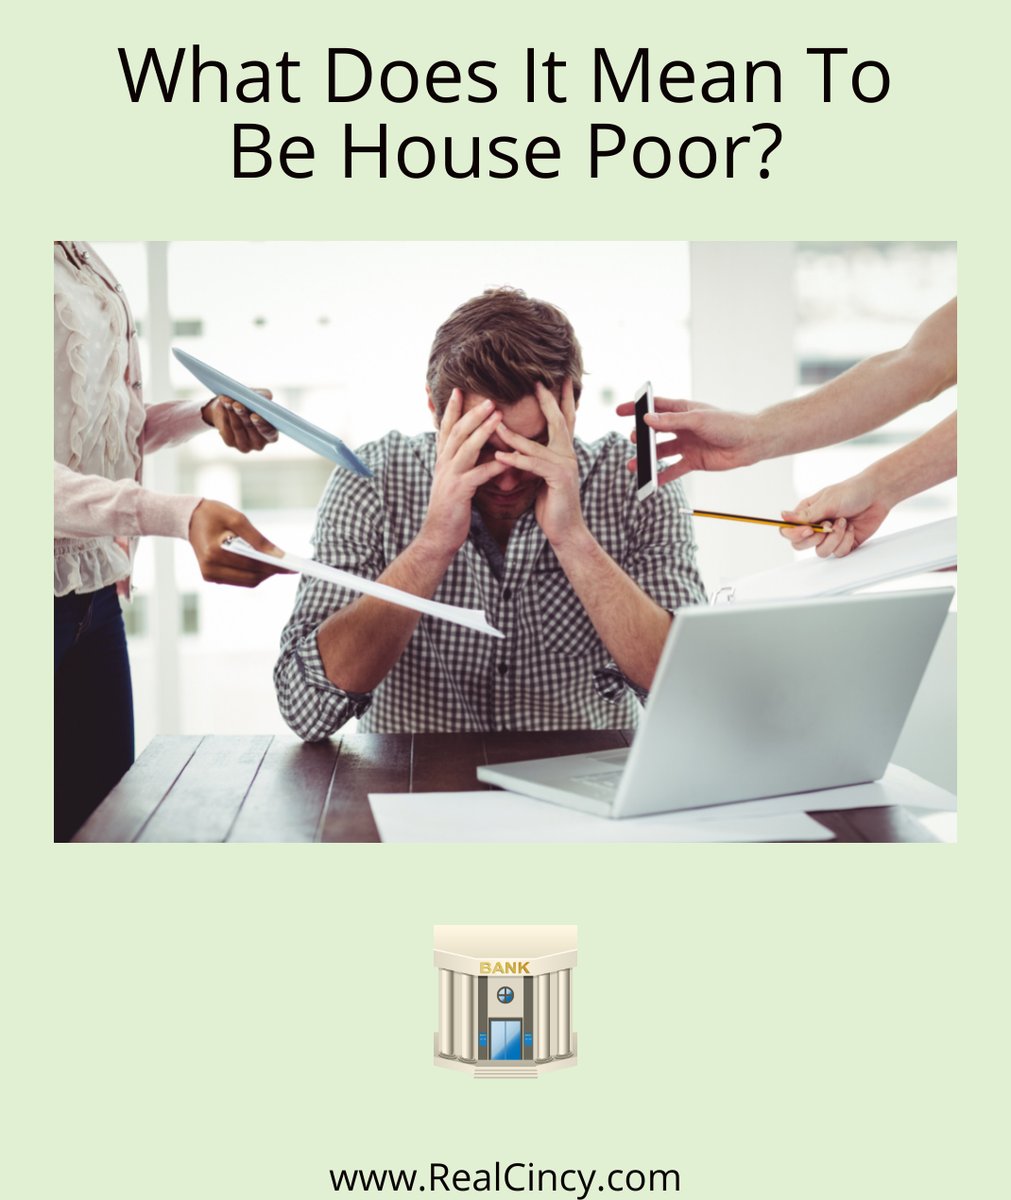 What Does It Mean To Be House Poor? cincinkyrealestate.com/blog/what-does… Cincinnati & Northern Kentucky Real Estate